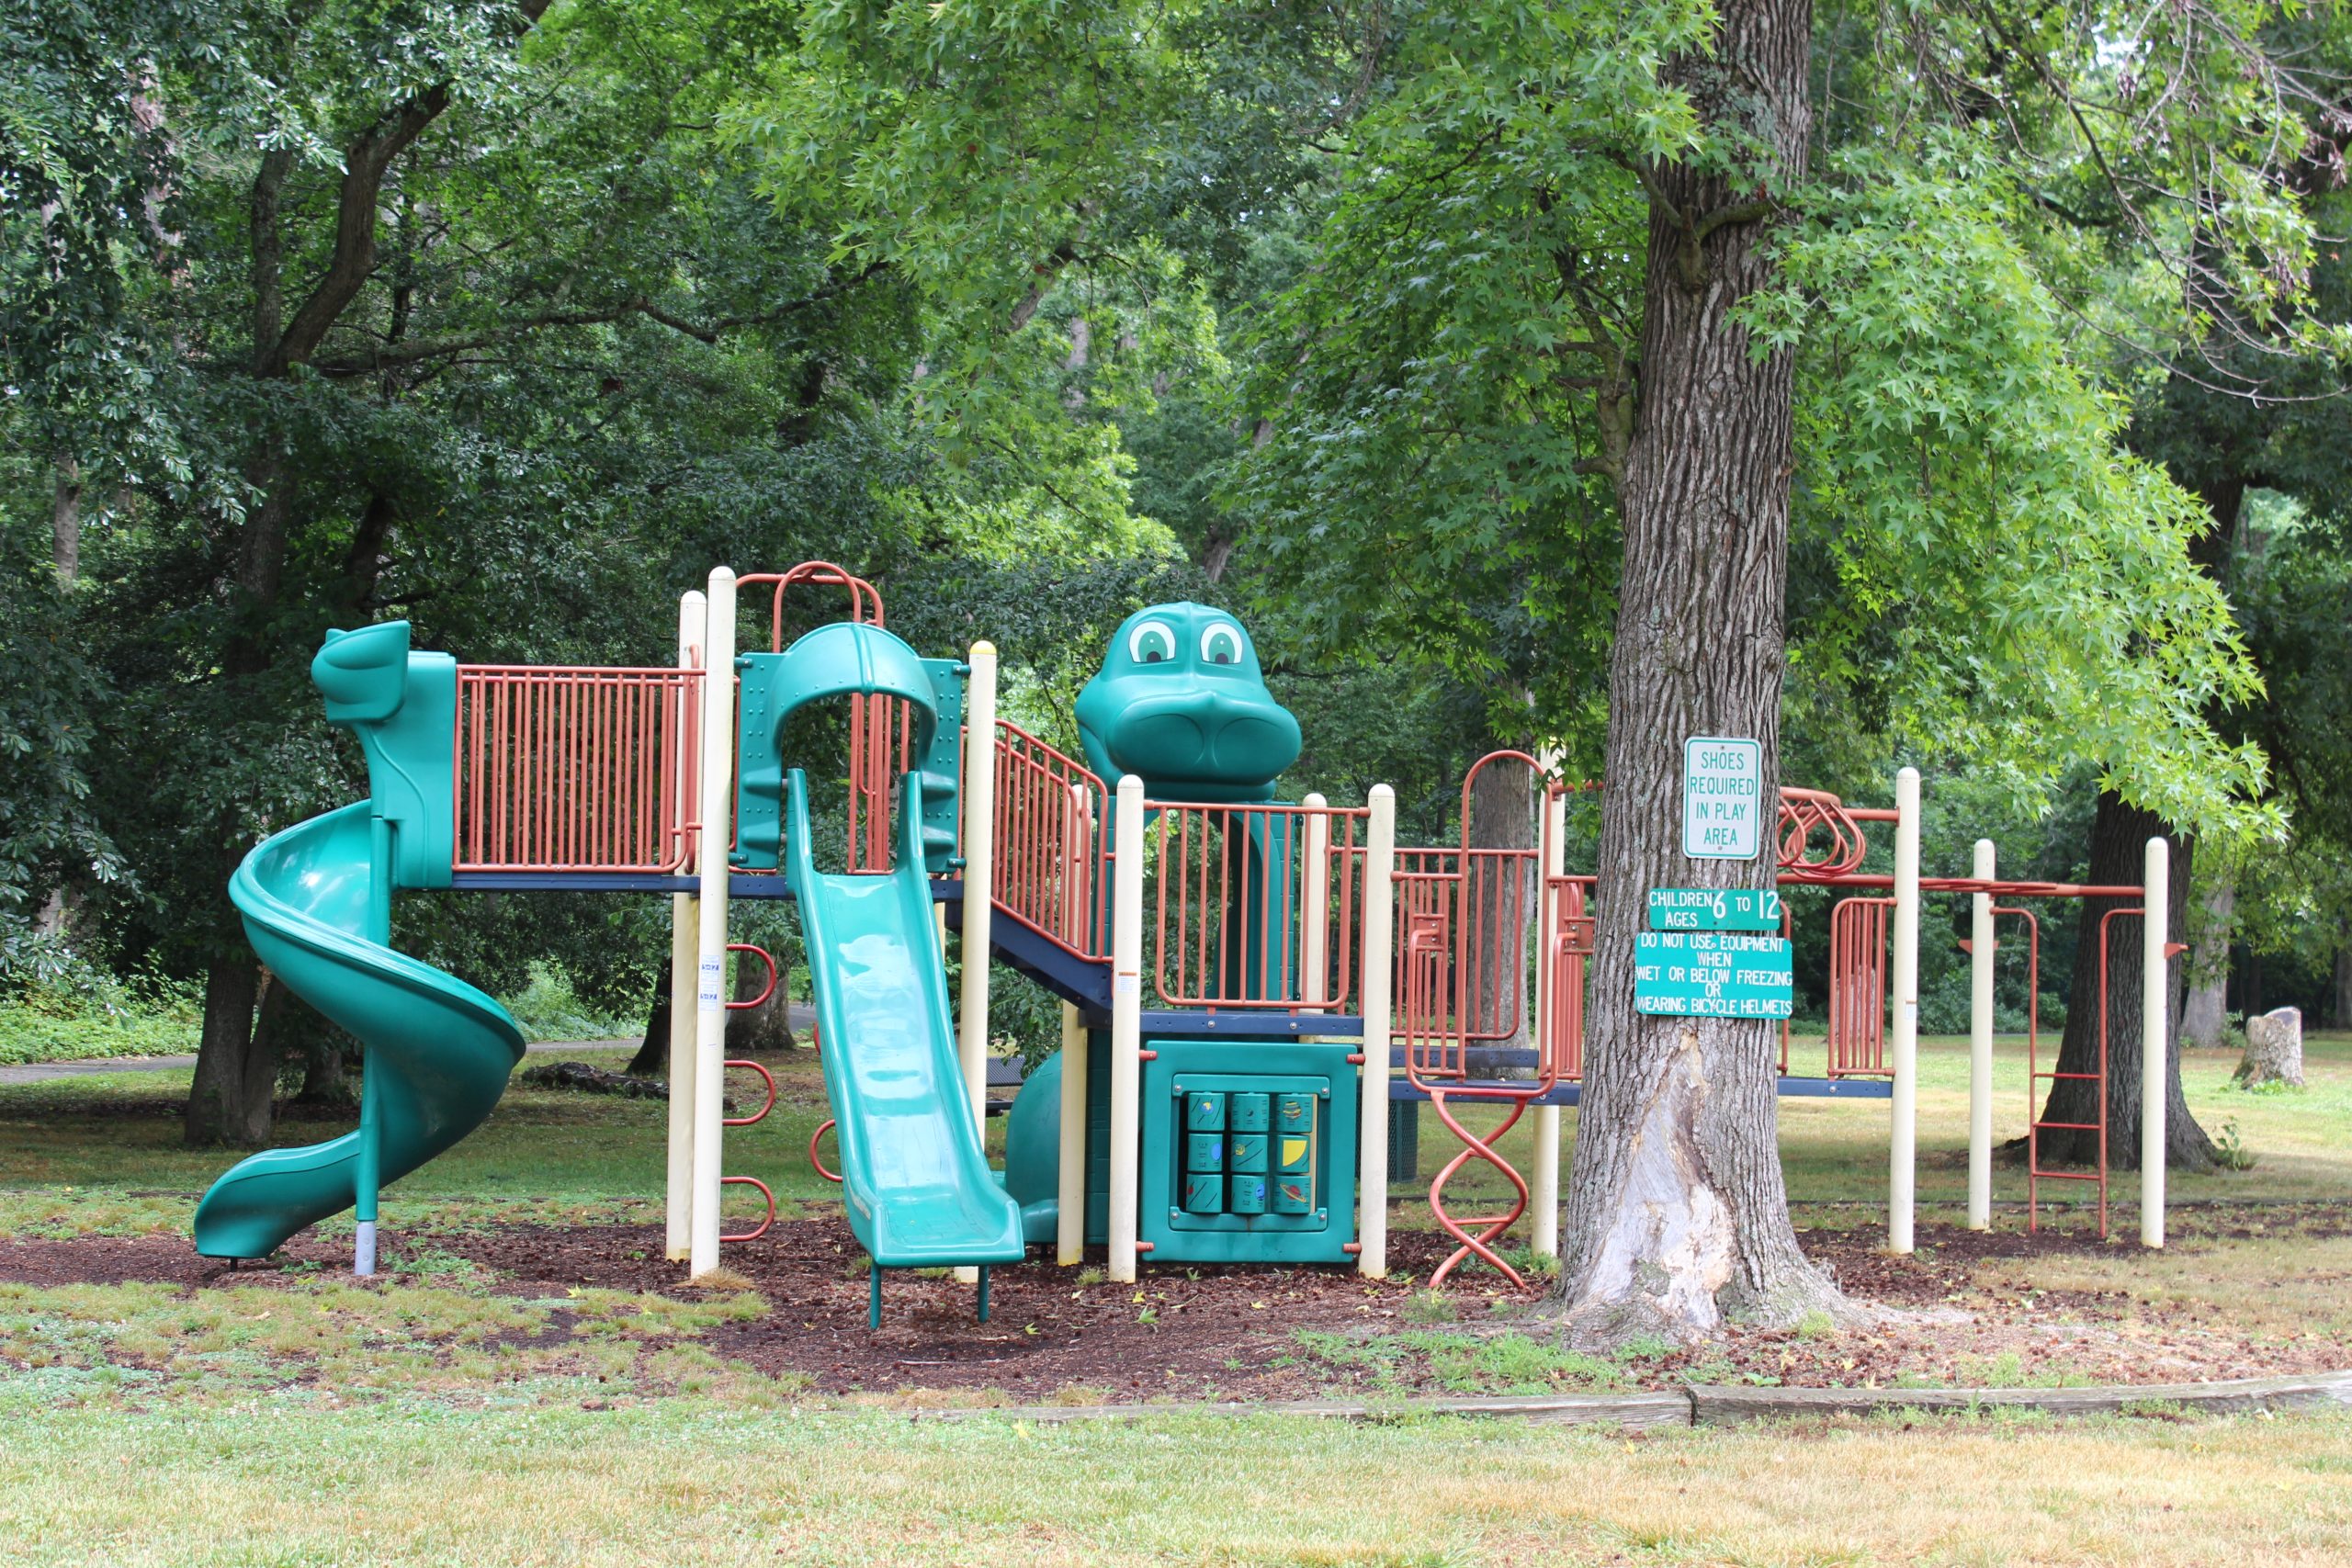 Forest Grove Park Playground in Vineland NJ horizontal picture close up